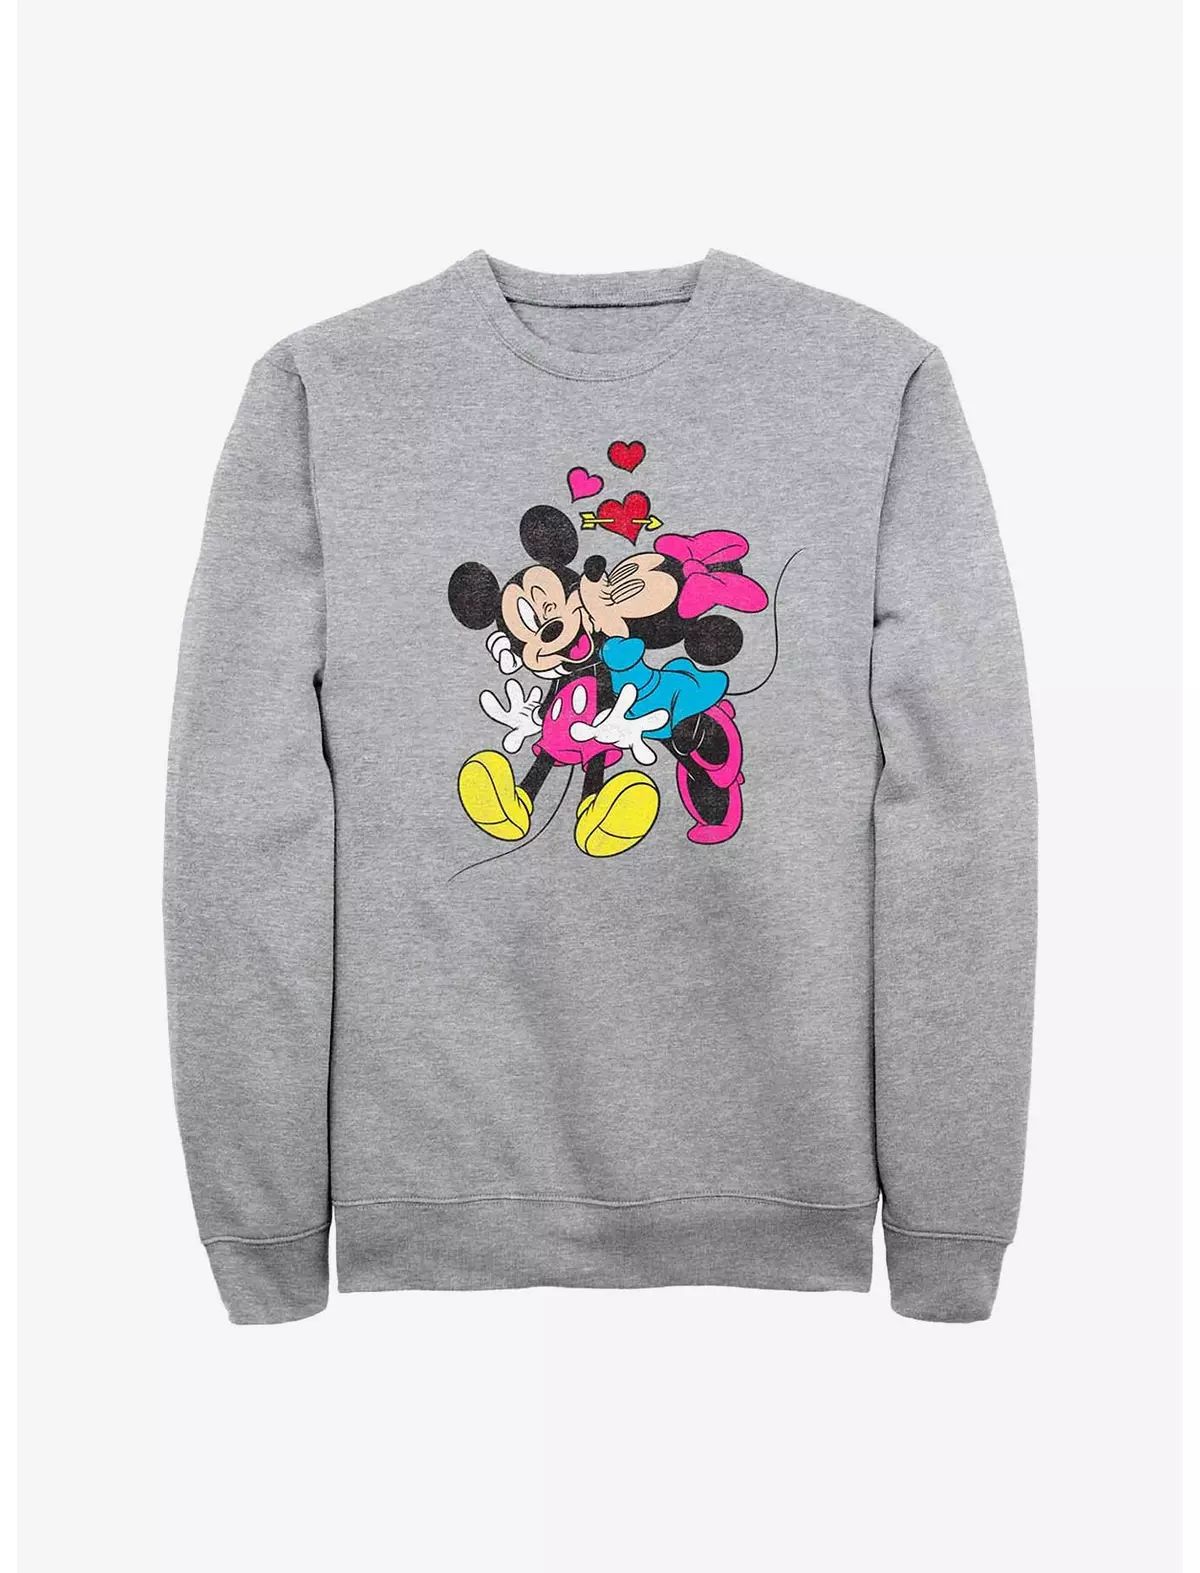 Disney Mickey Mouse & Minnie Mouse Love Sweatshirt | Hot Topic